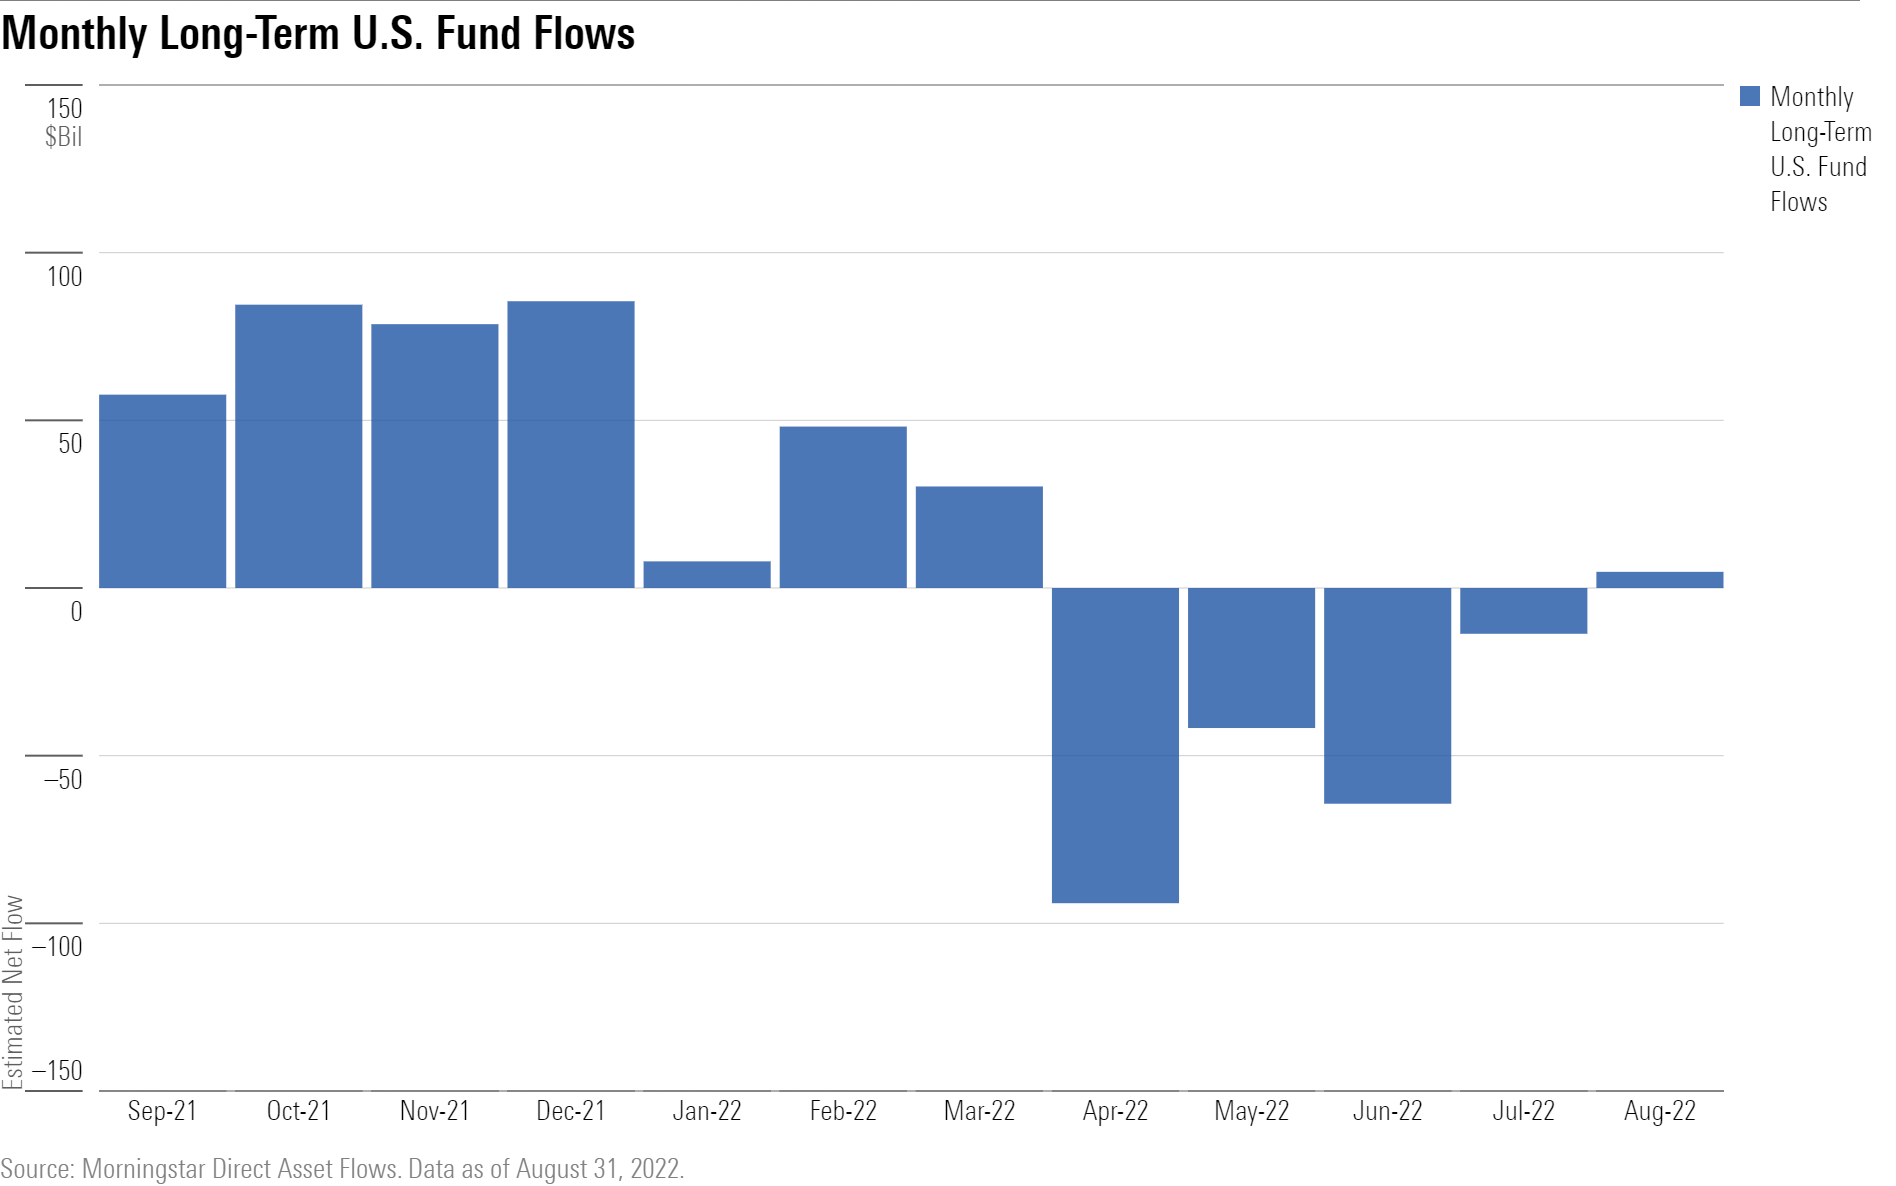 A bar graph showing that long-term U.S. fund flows turned positive in August after four consecutive months of outflows.